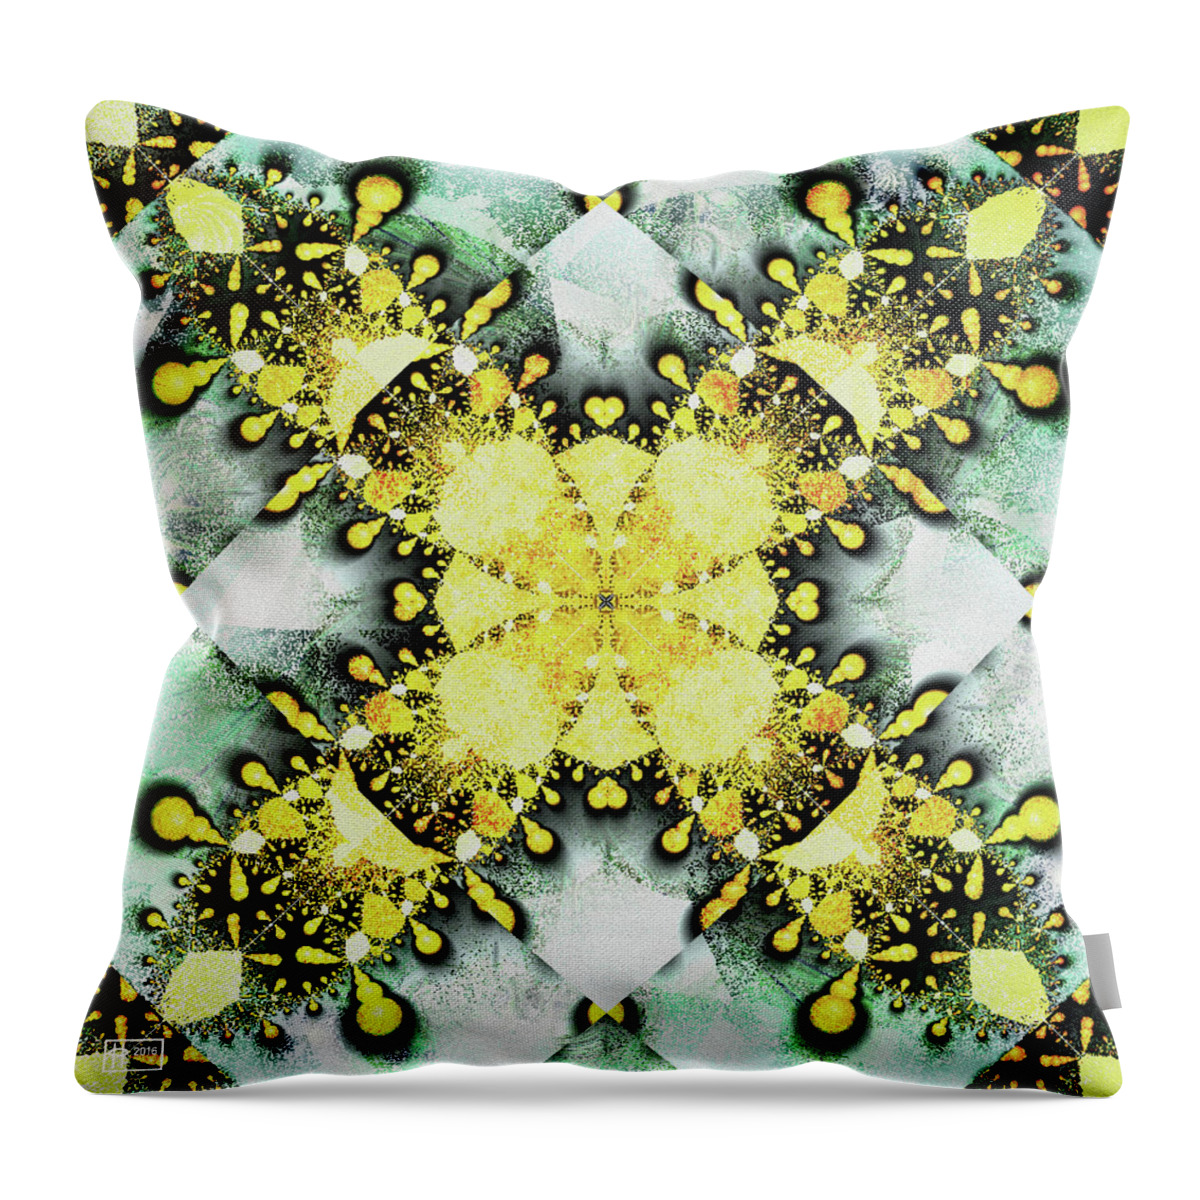 Abstract Throw Pillow featuring the digital art Pinned Down by Jim Pavelle